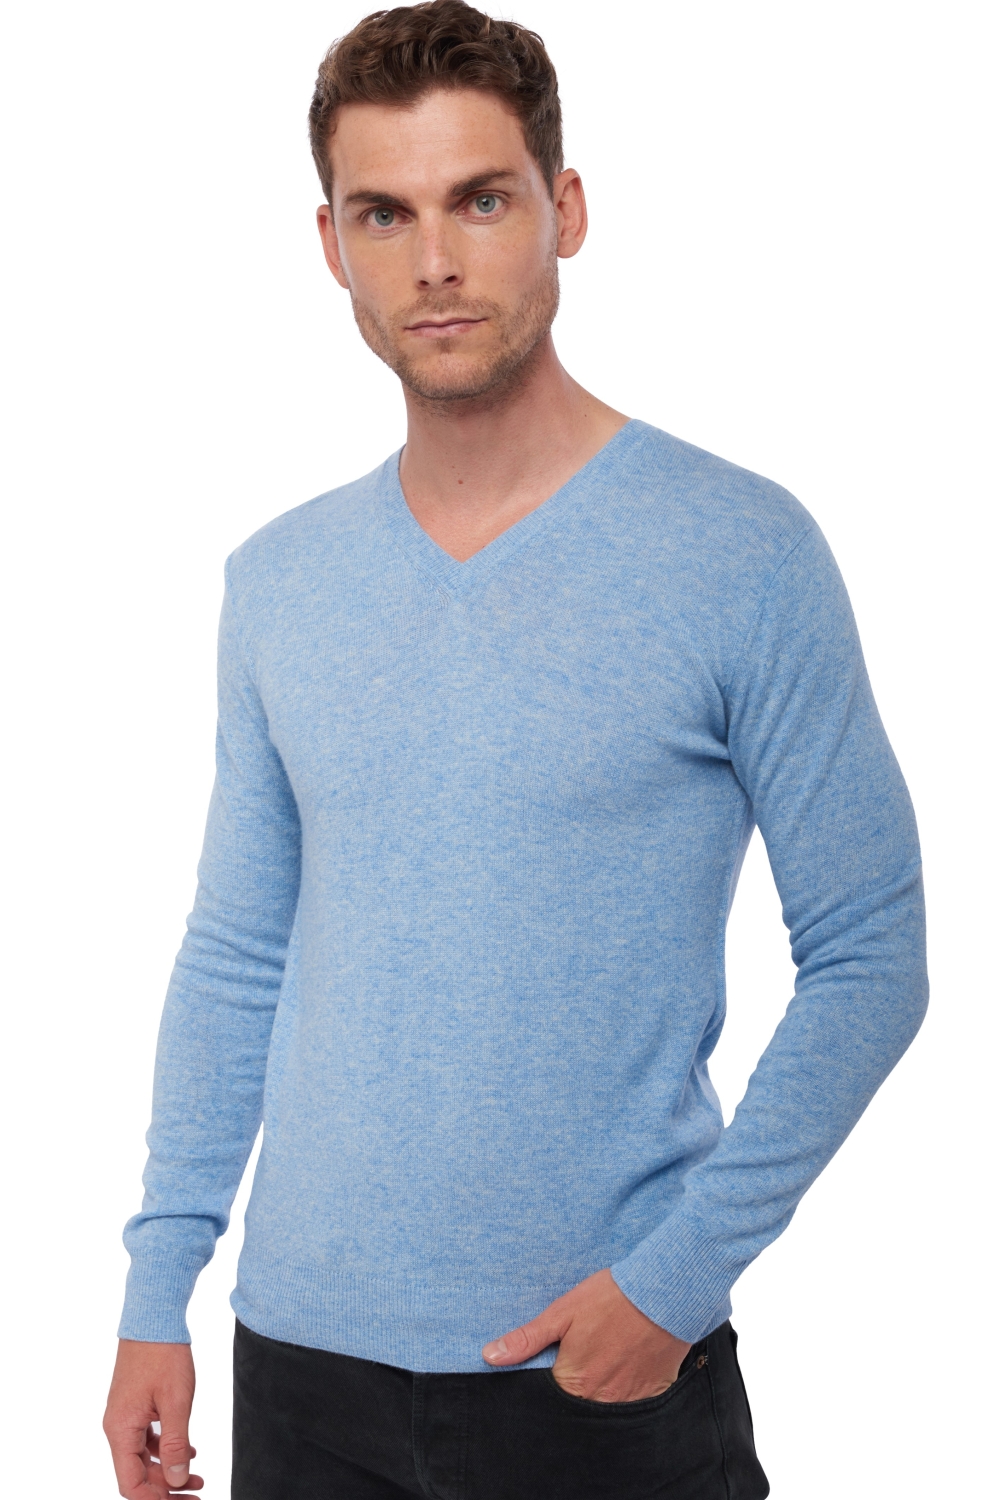 Cashmere men low prices tor first powder blue m